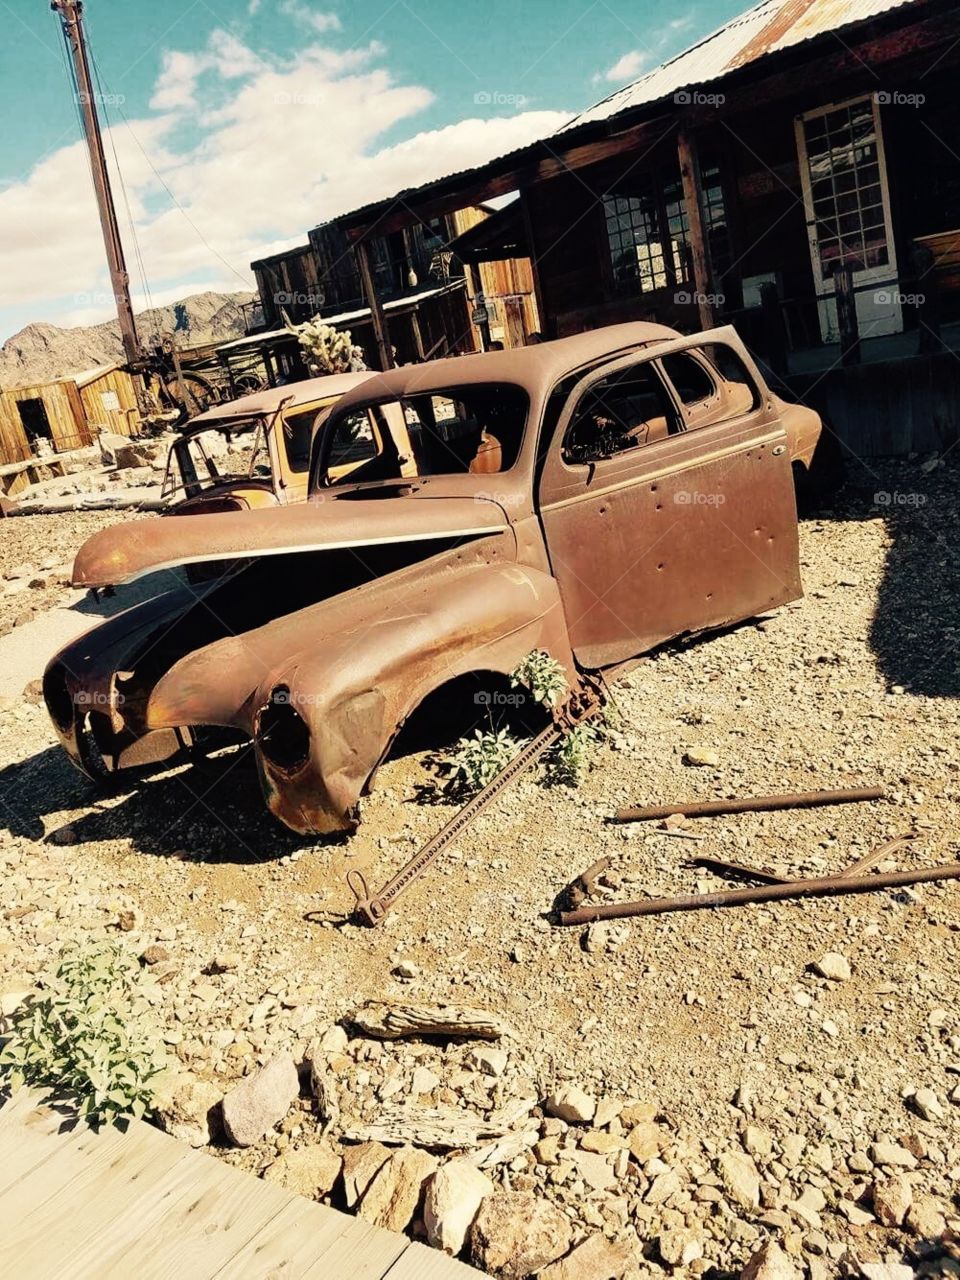 Car in a ghost town